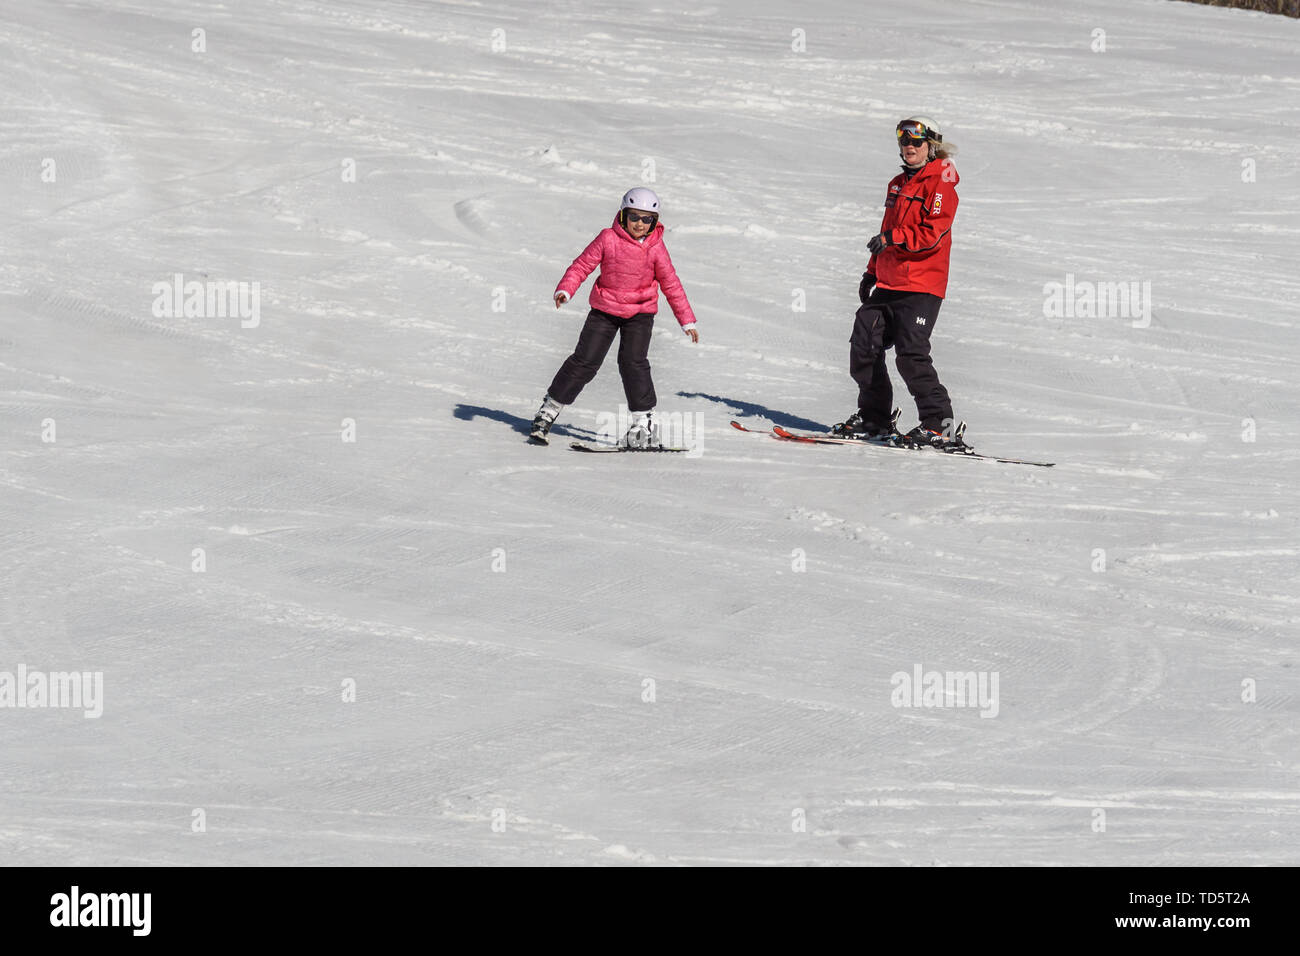 KIMBERLEY, CANADA - MARCH 22, 2019: Mountain Resort view early spring child and ski trainer skiing. Stock Photo